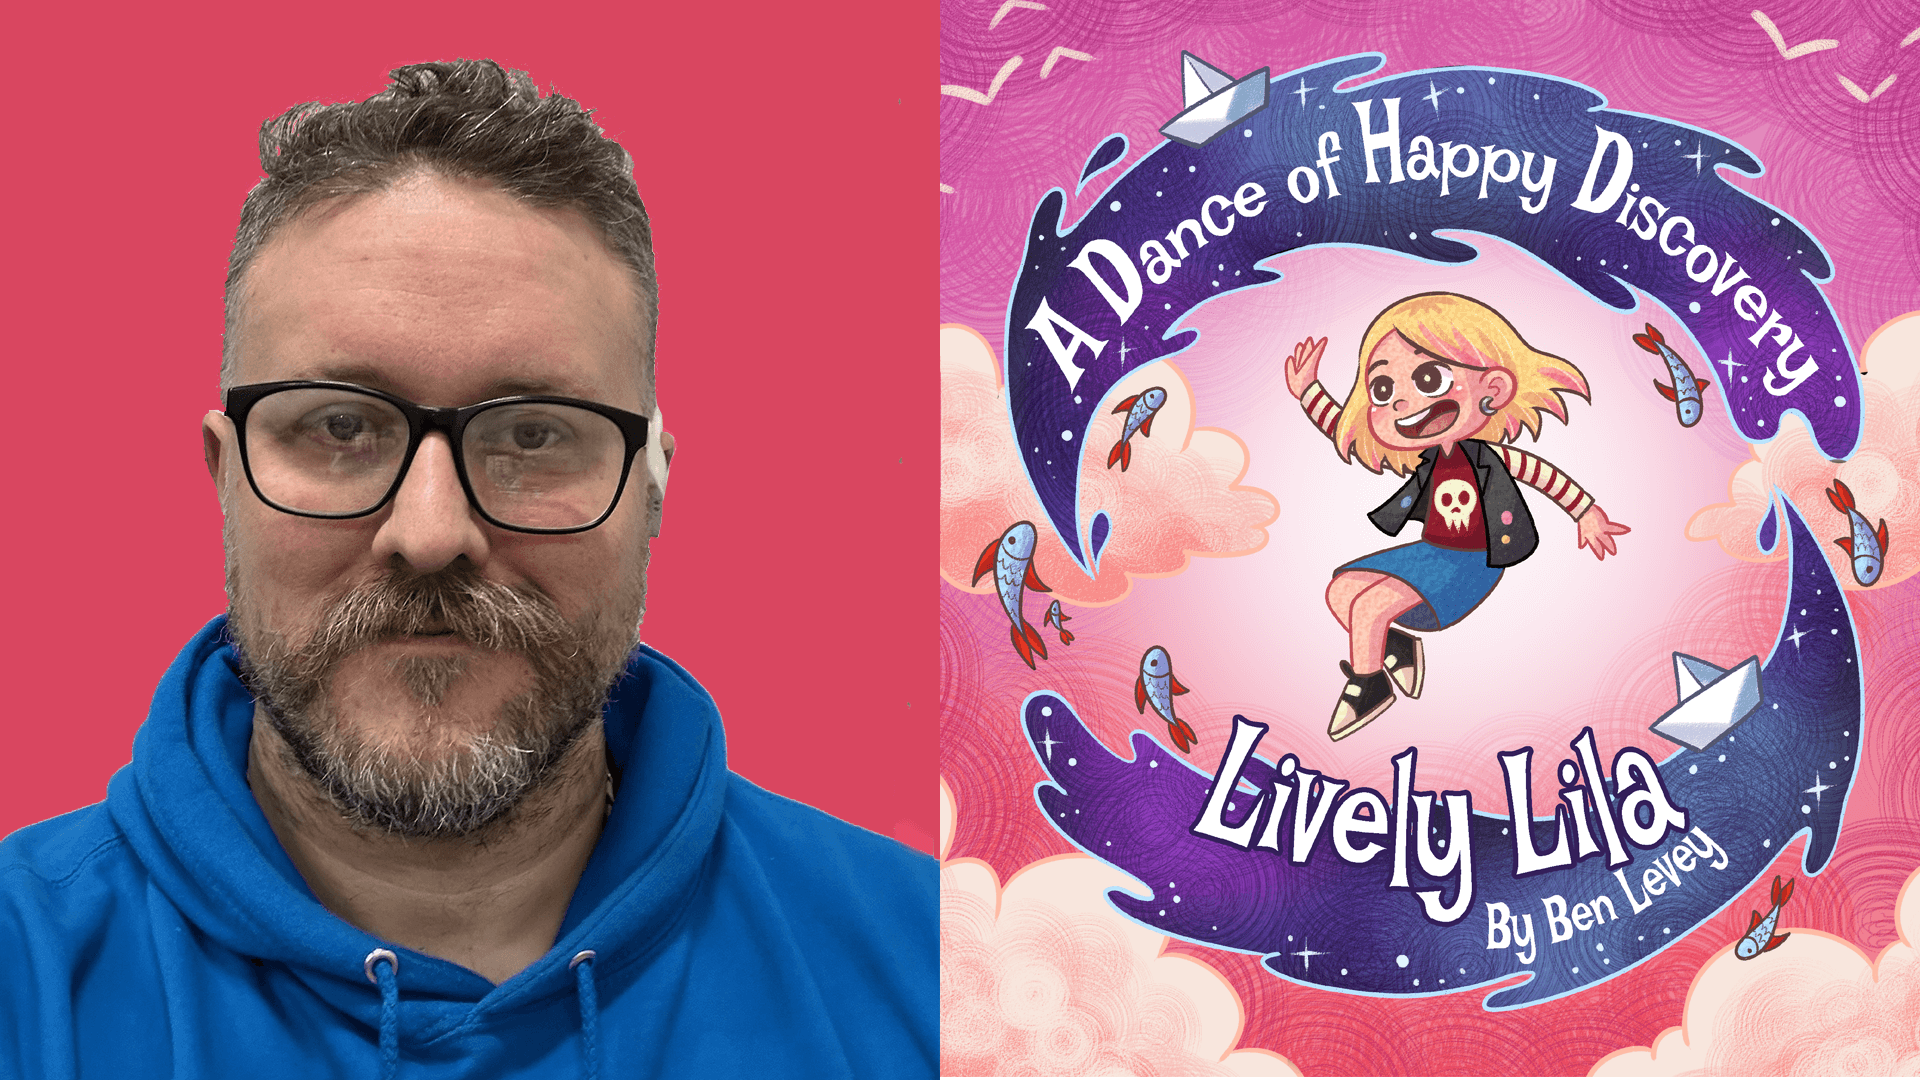 Ben Levey and the cover of 'Lively Lila: A Dance of Happy Discovery'